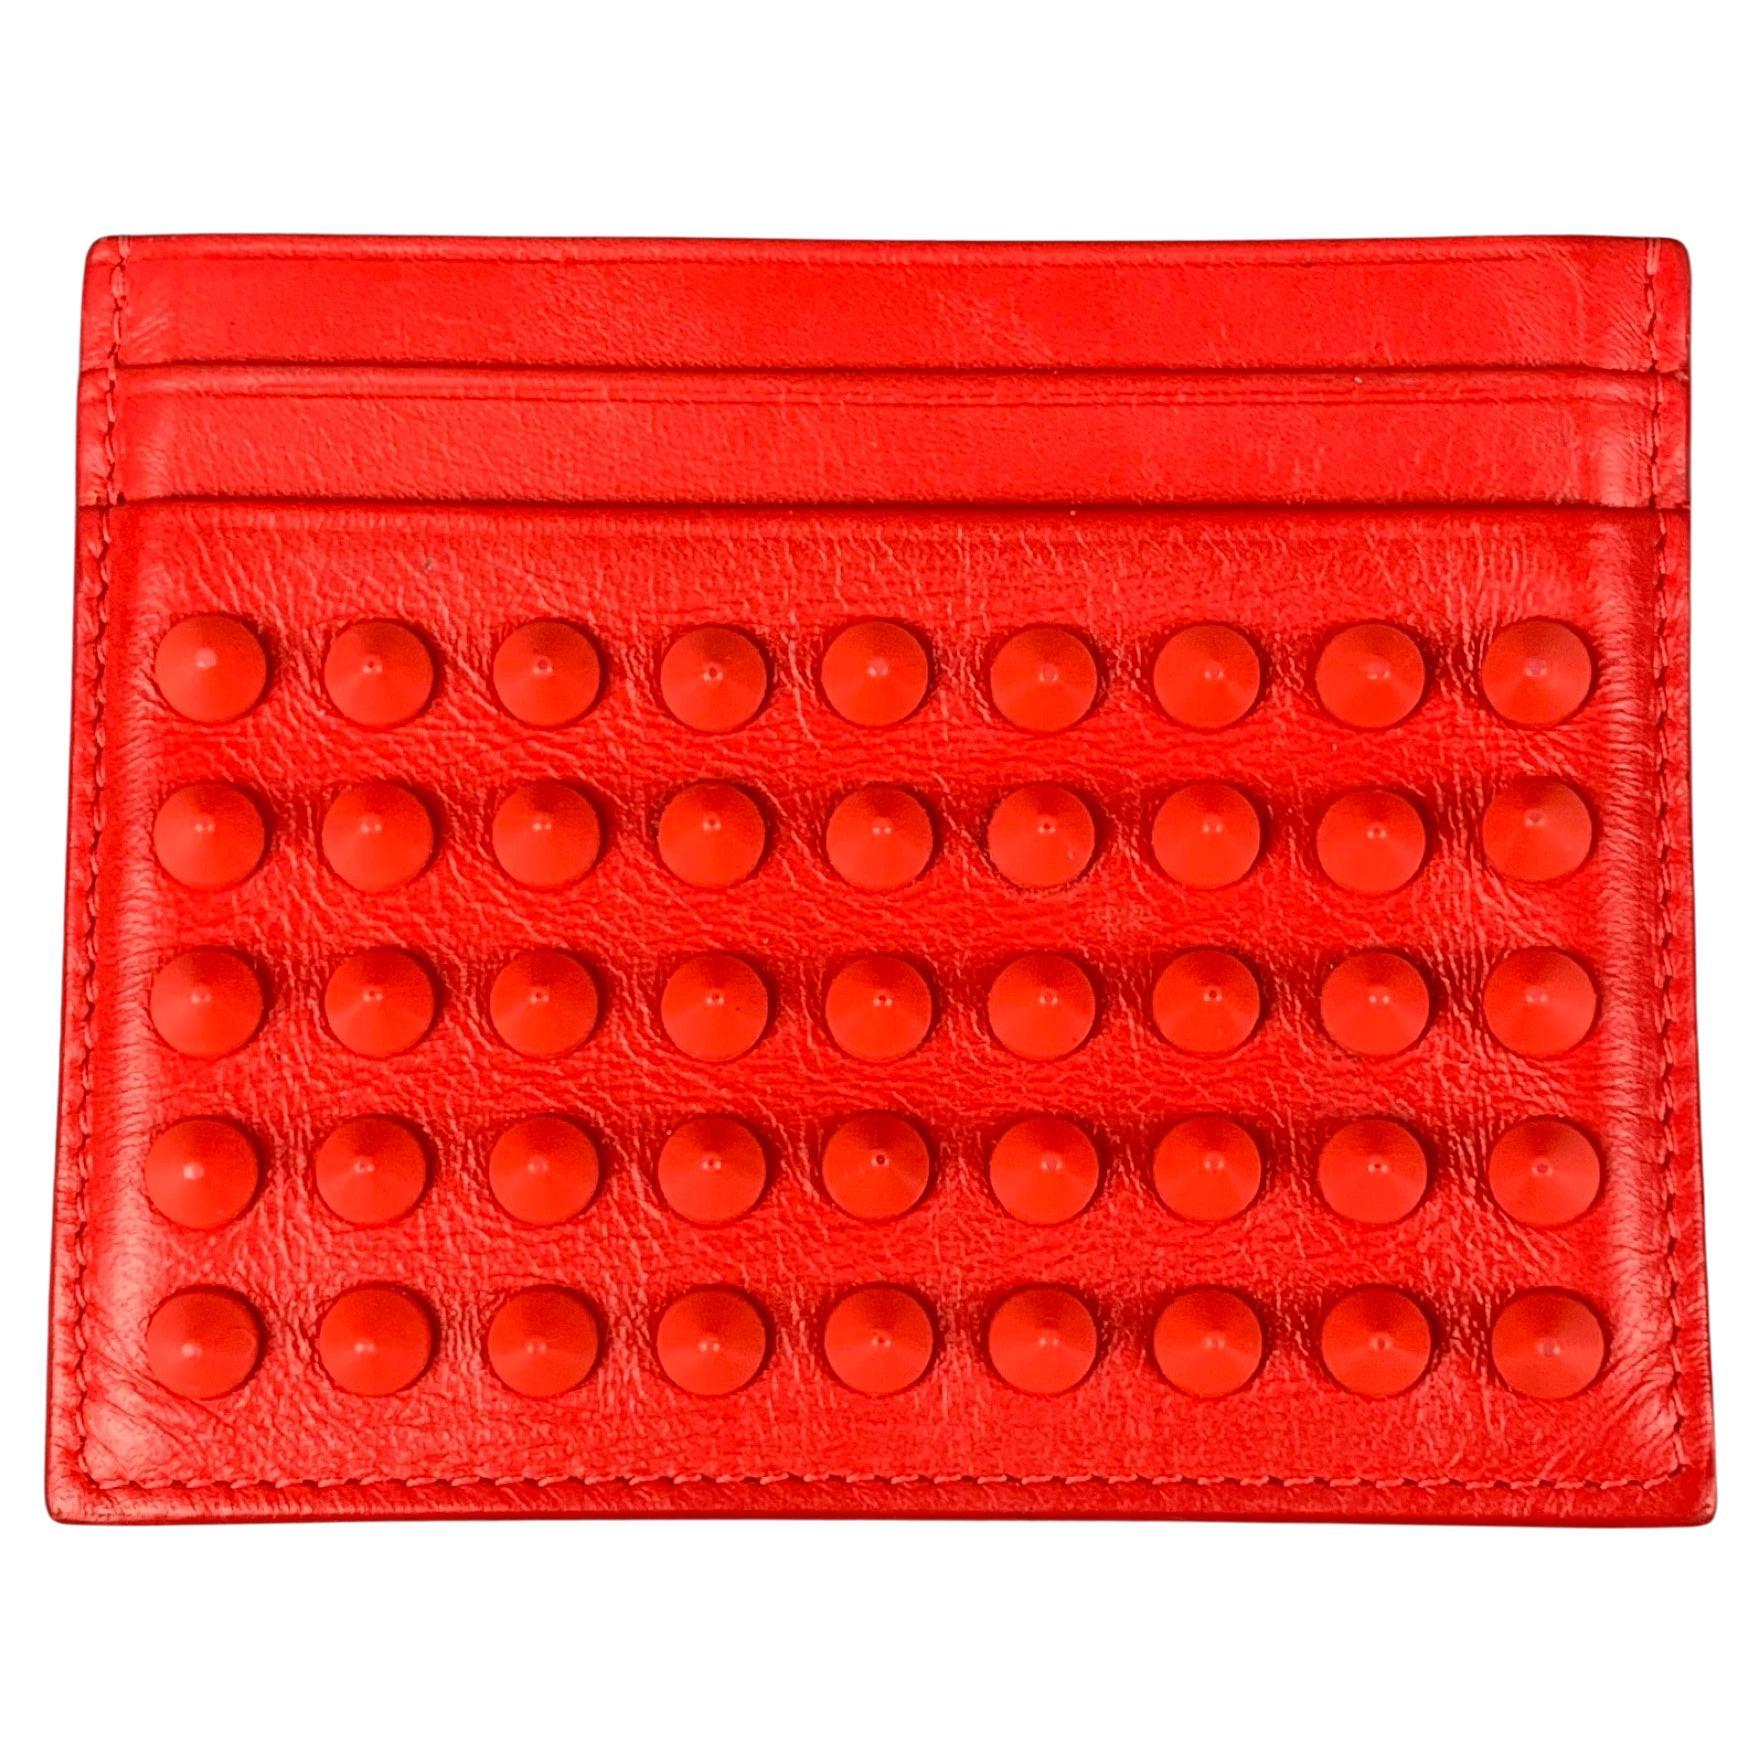 CHRISTIAN LOUBOUTIN Red Studded Leather Wallet